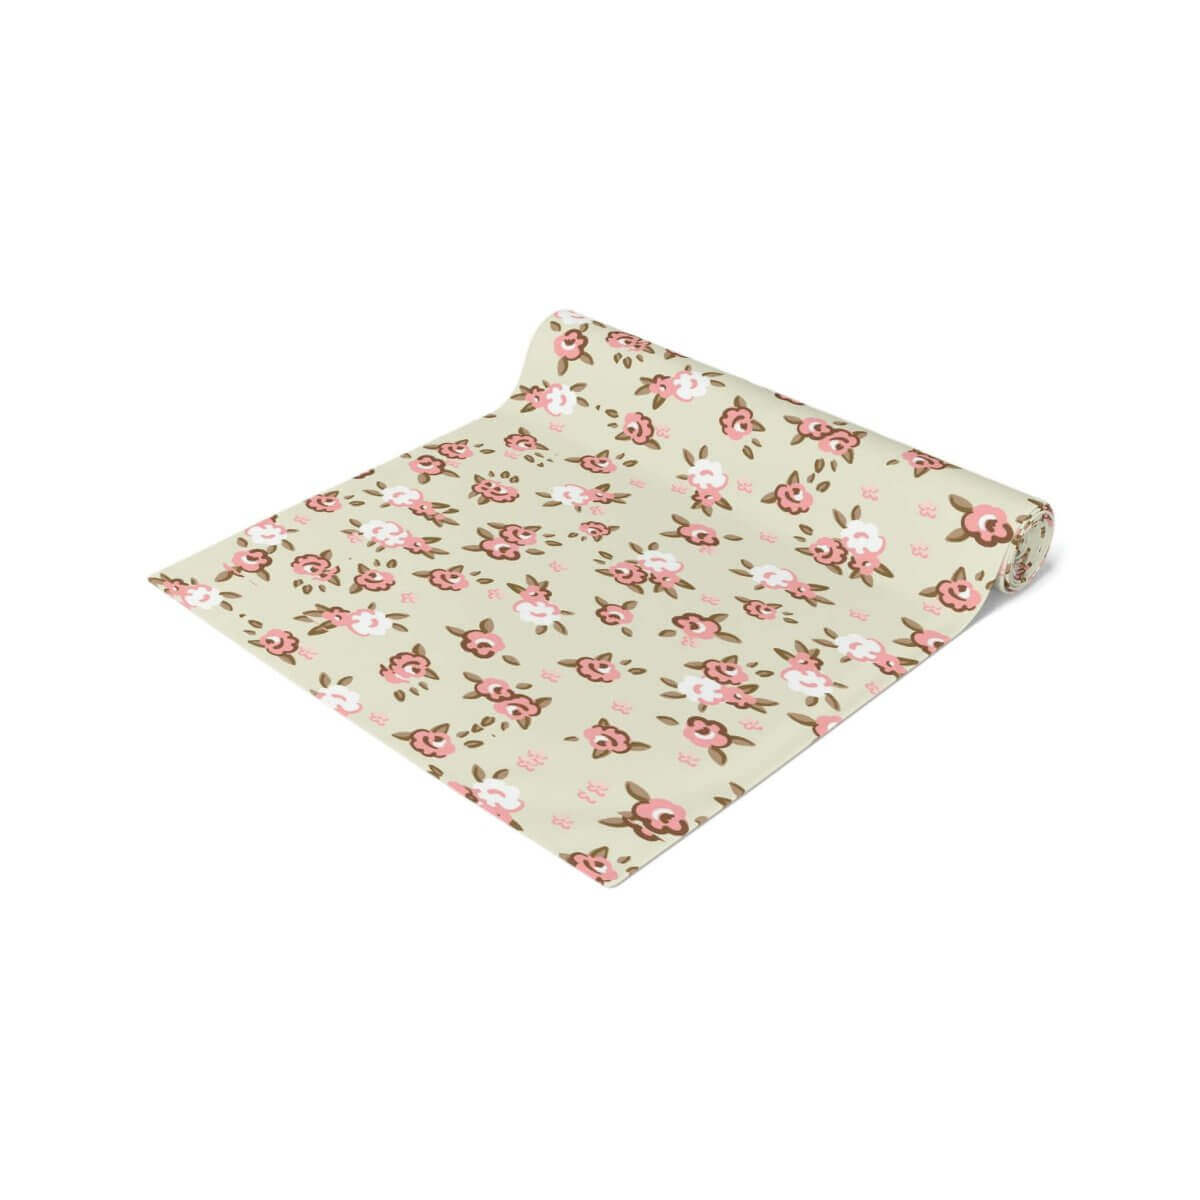 English Rose Table Runner (Cotton, Poly) - Hearth Home & Living